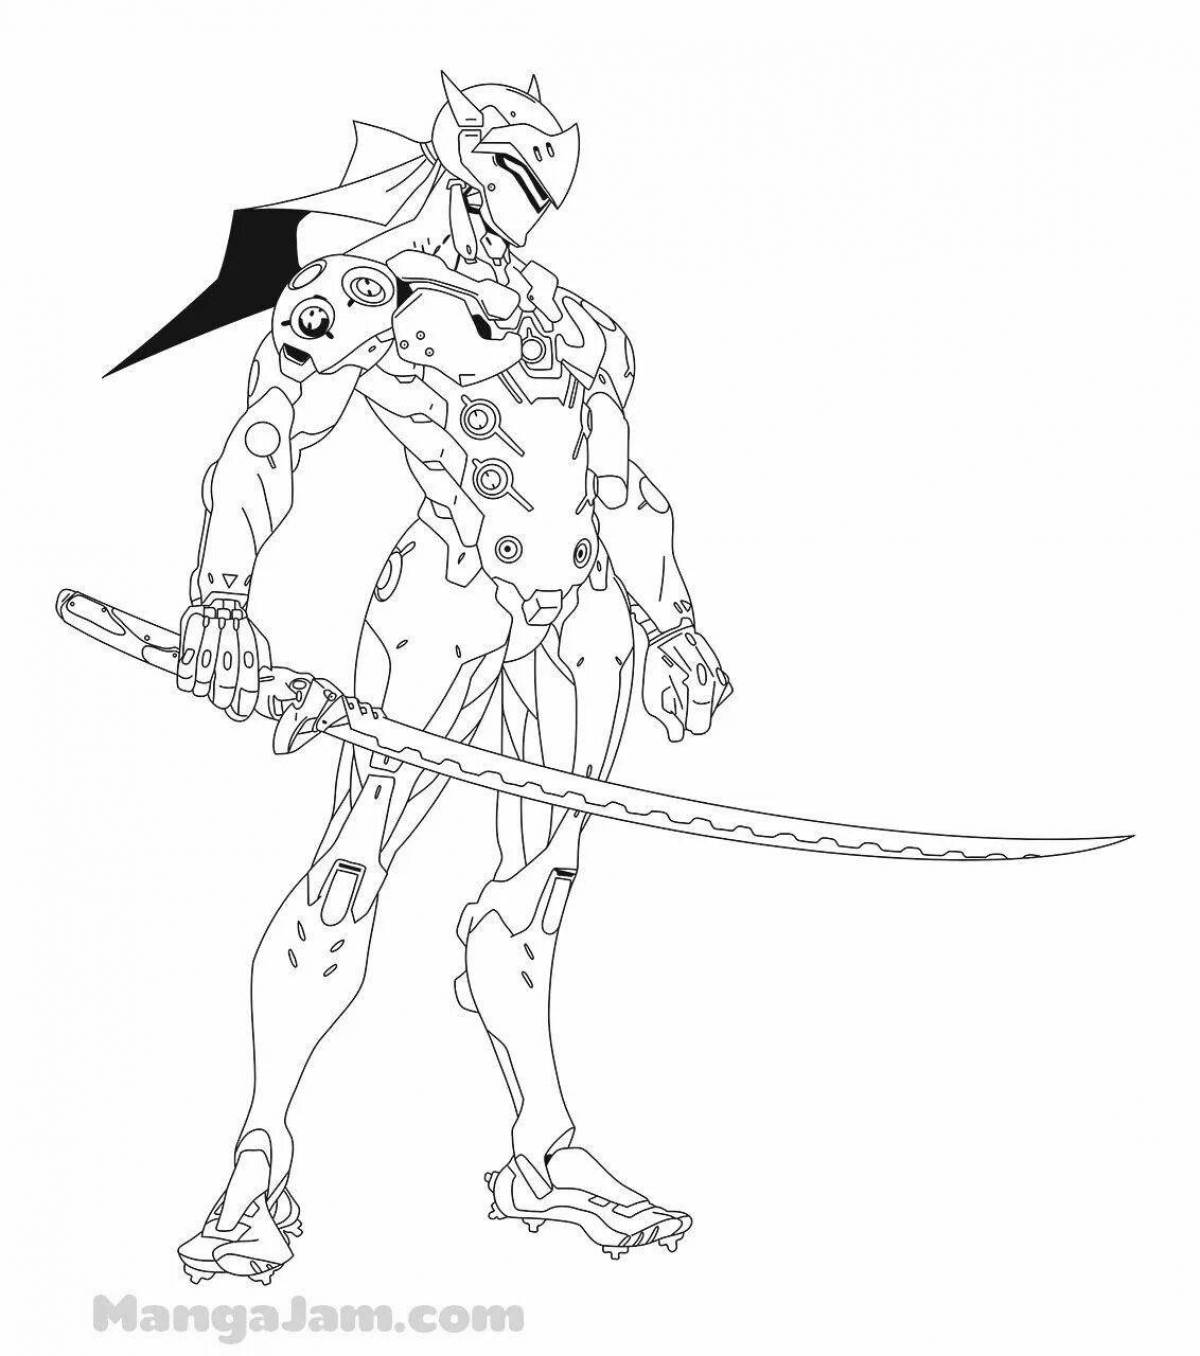 Awesome overwatch coloring page